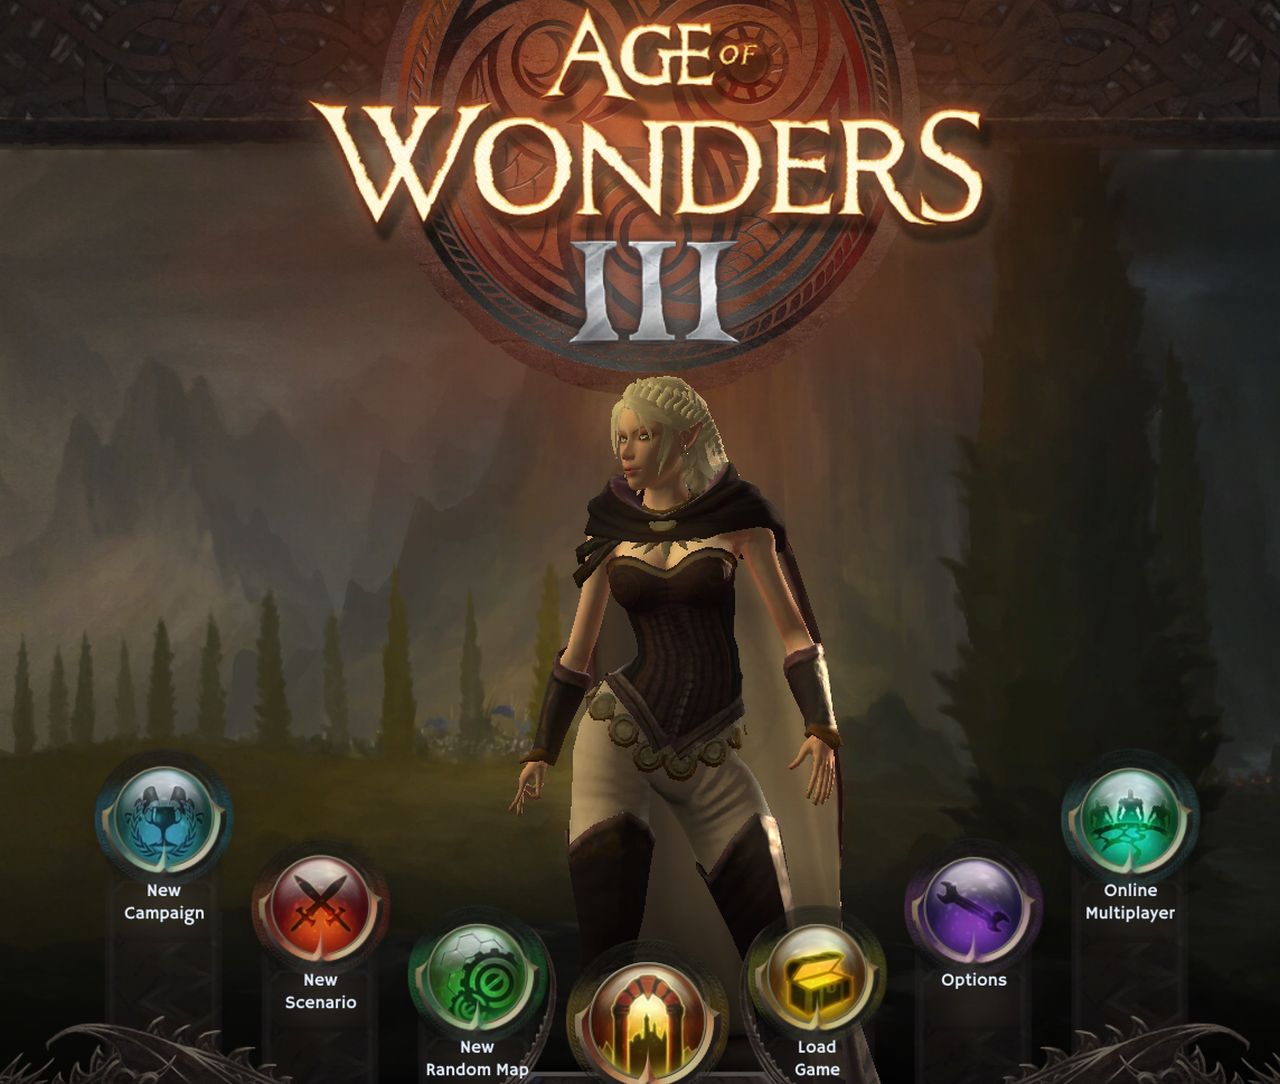 Gog age of wonders 3 patch download full